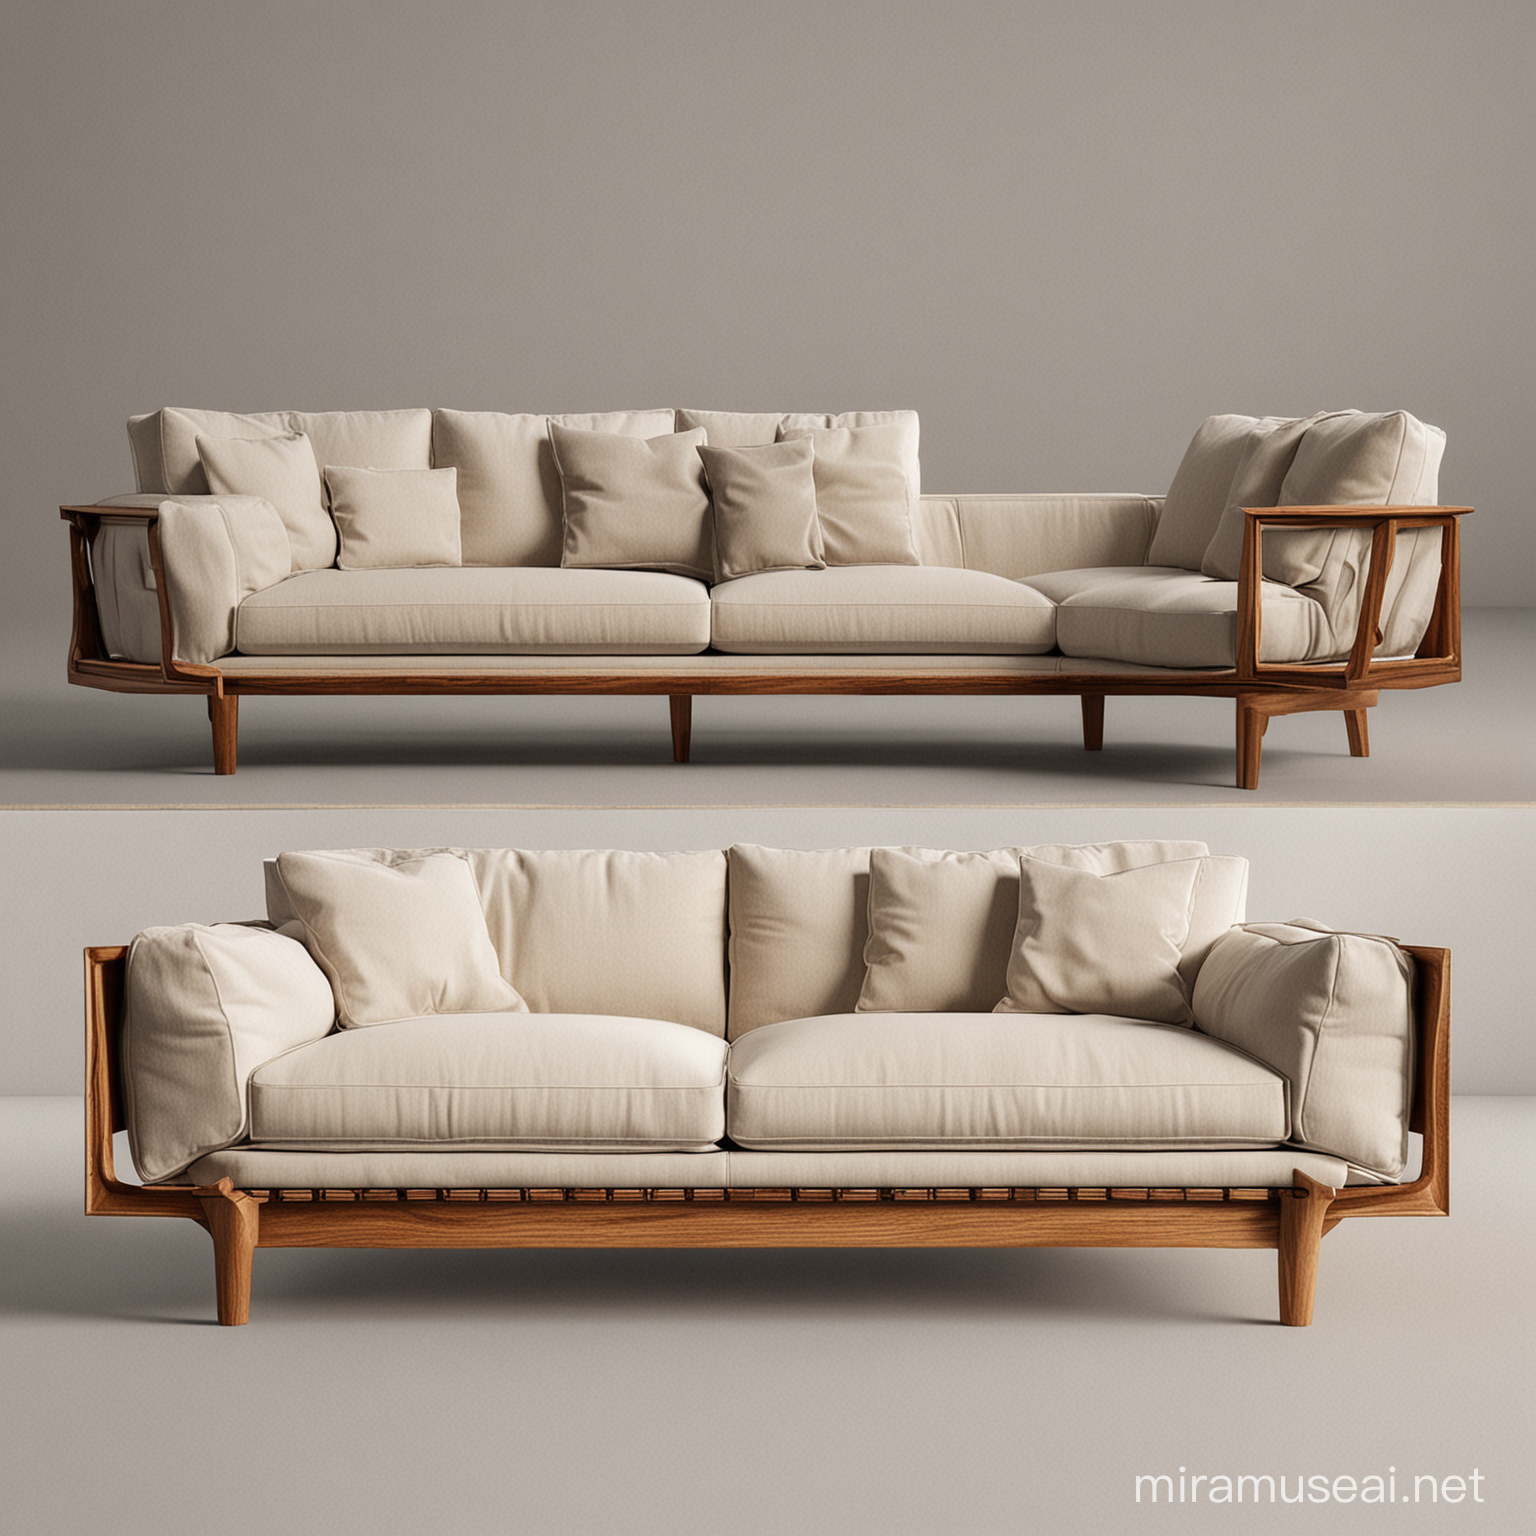 #visual #visualart #digitalart #setdesign
#furniture #sofa #sofas# very well designed very small %3 amountwooddetails%3 showing the outline of the sofa   #furnitures #homedesign_ #homedecoration #coronarender #livingroom #interiordesign_ #2024furnituredesign #furniture #sofa set #decoration #homedecoration#rendertrends #Perfect view#renderarchitecture #modern wooden sofa art#architecture_#architecturephotography #architecture_best#architecture_lovers #architecturestudents#architecturaldigest #architecturevisualization#perspectief view #architectureape #finearchitecture#architecturetravel#architecturebuilding#renderlovers#interiordesignerslife_#interiordesigninspiration#interiordesigntrends#interiordesignblog#interiordesignersofinstagram_#interiordesignerlife#interiordesignblogger#interiordesignmag#interiordesignlover#interiordesignmag#interiordesignaddict#midjourney